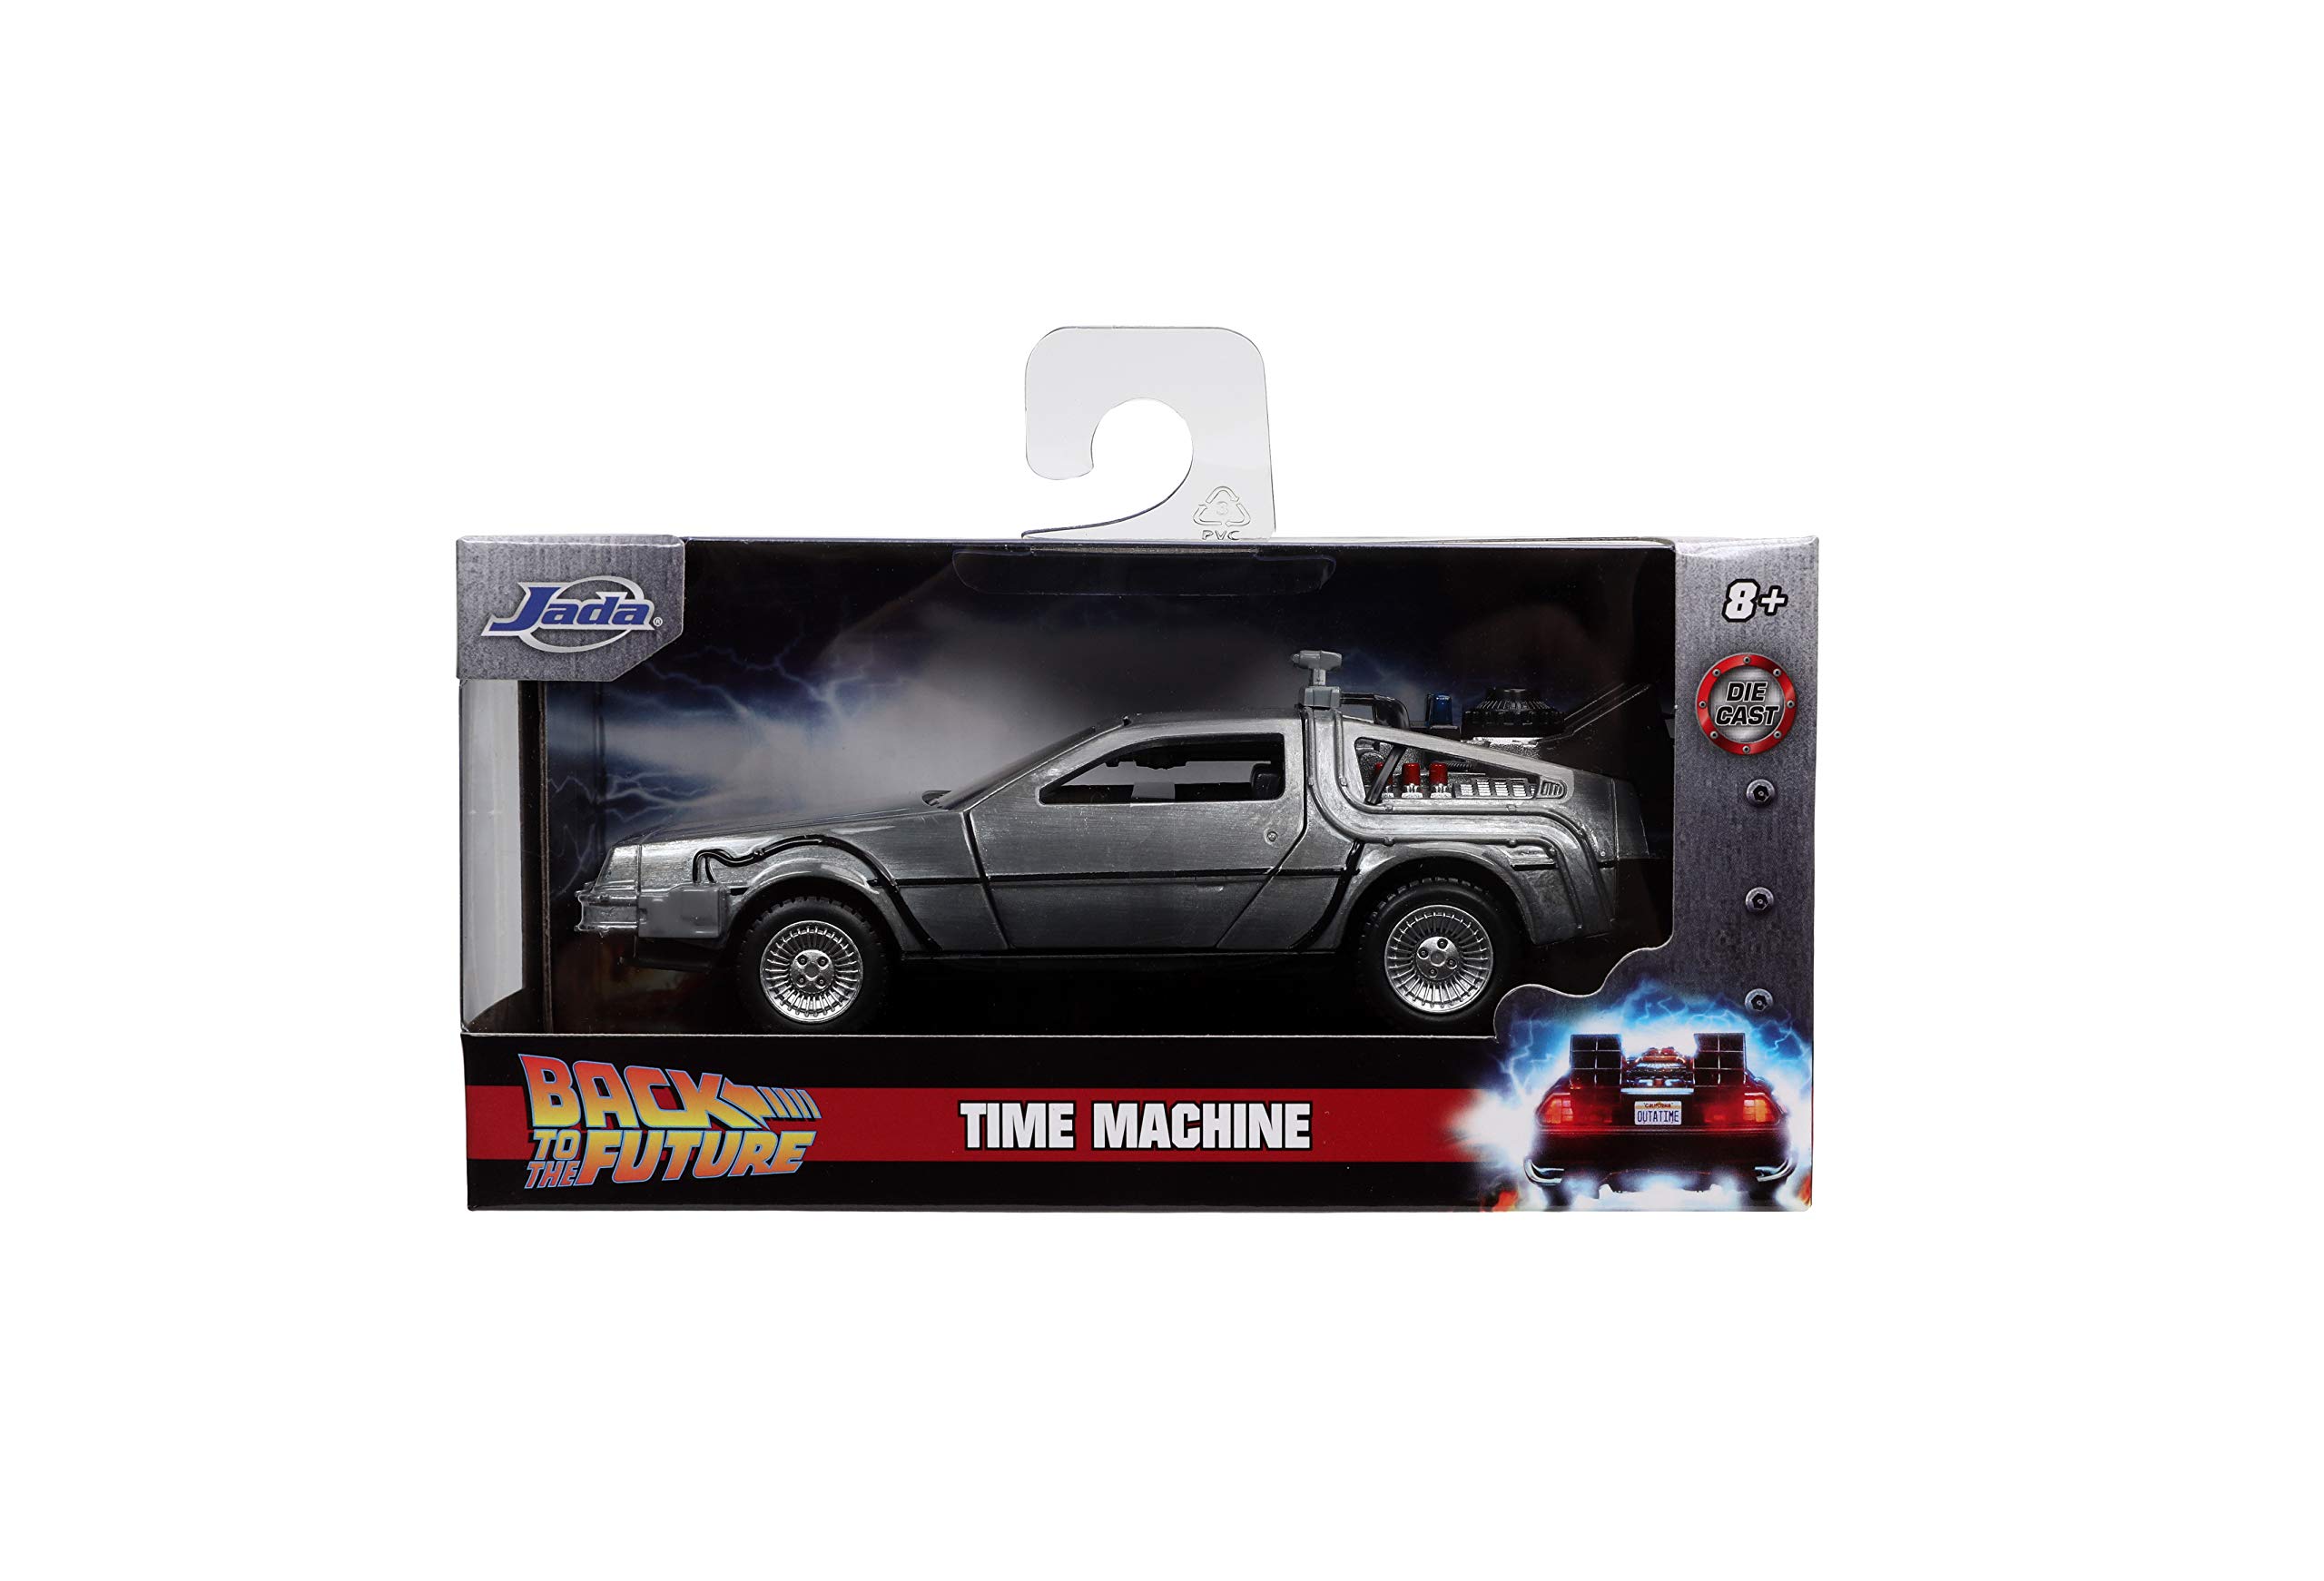 Jada Toys Back to The Future Time Machine 1:32 Die-cast Car, Toys for Kids and Adults, Silver